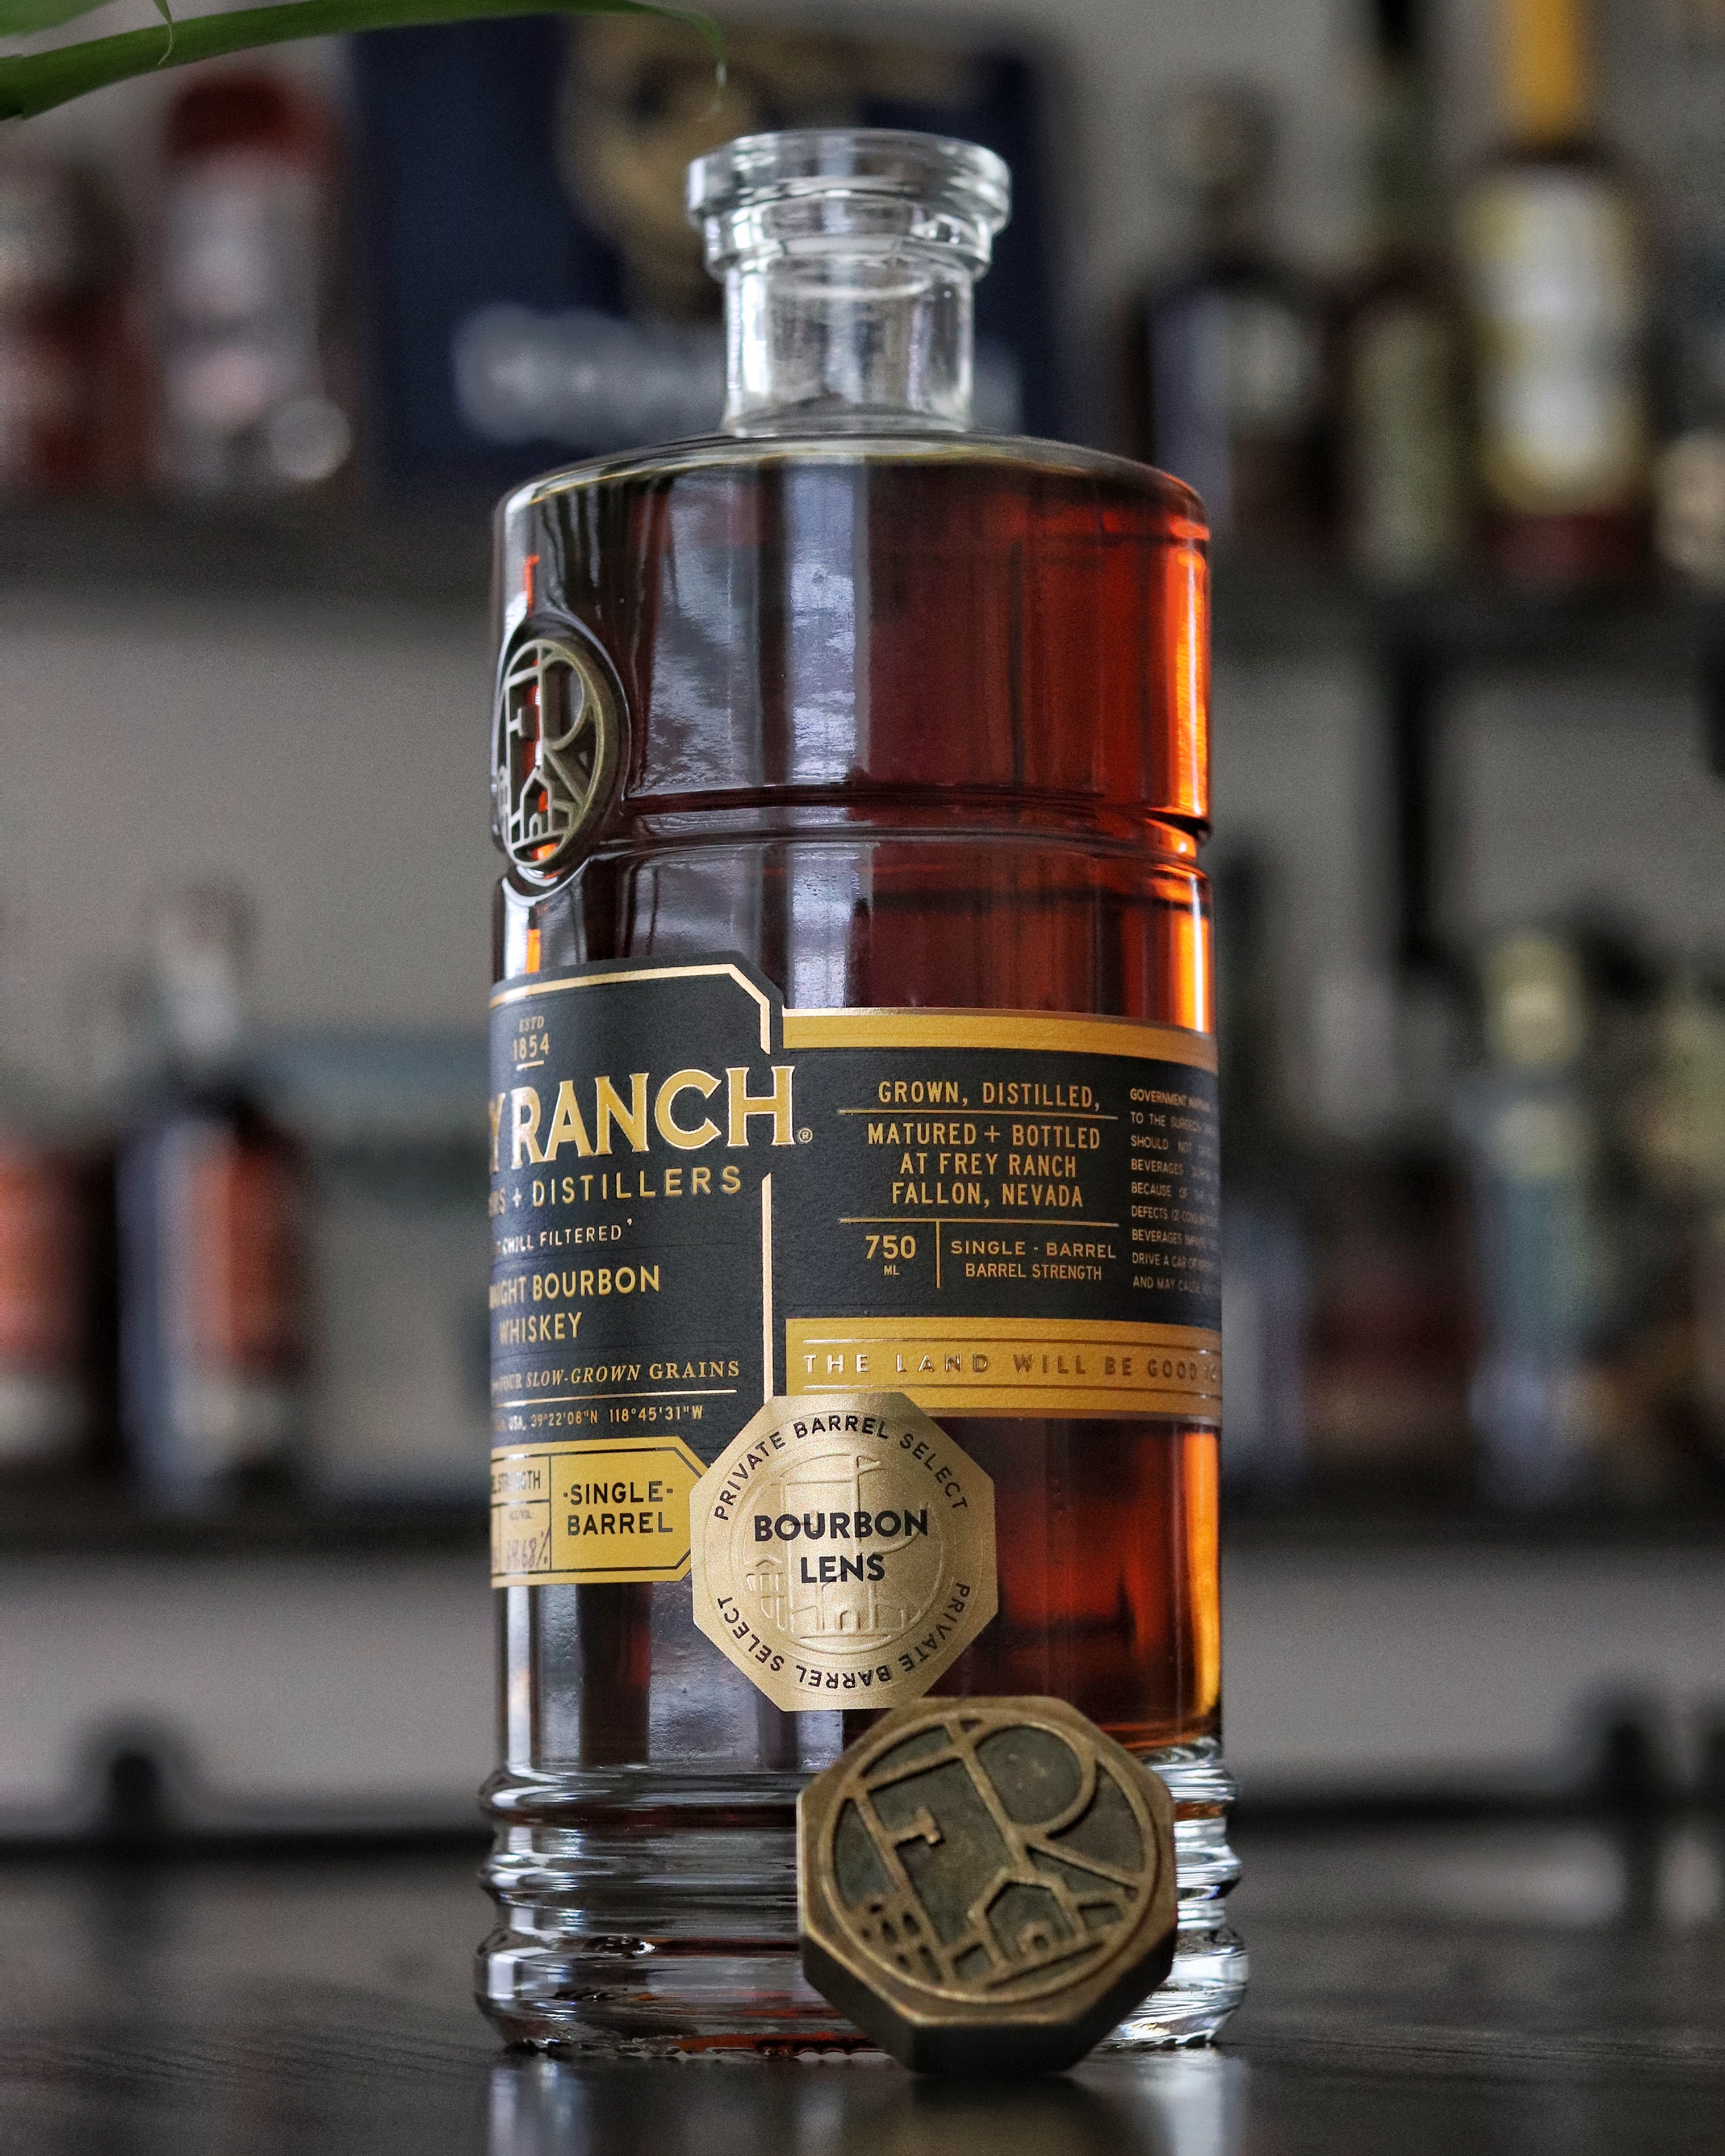 169: Don’t Miss Your Chance at This Frey Ranch Single Barrel Bourbon